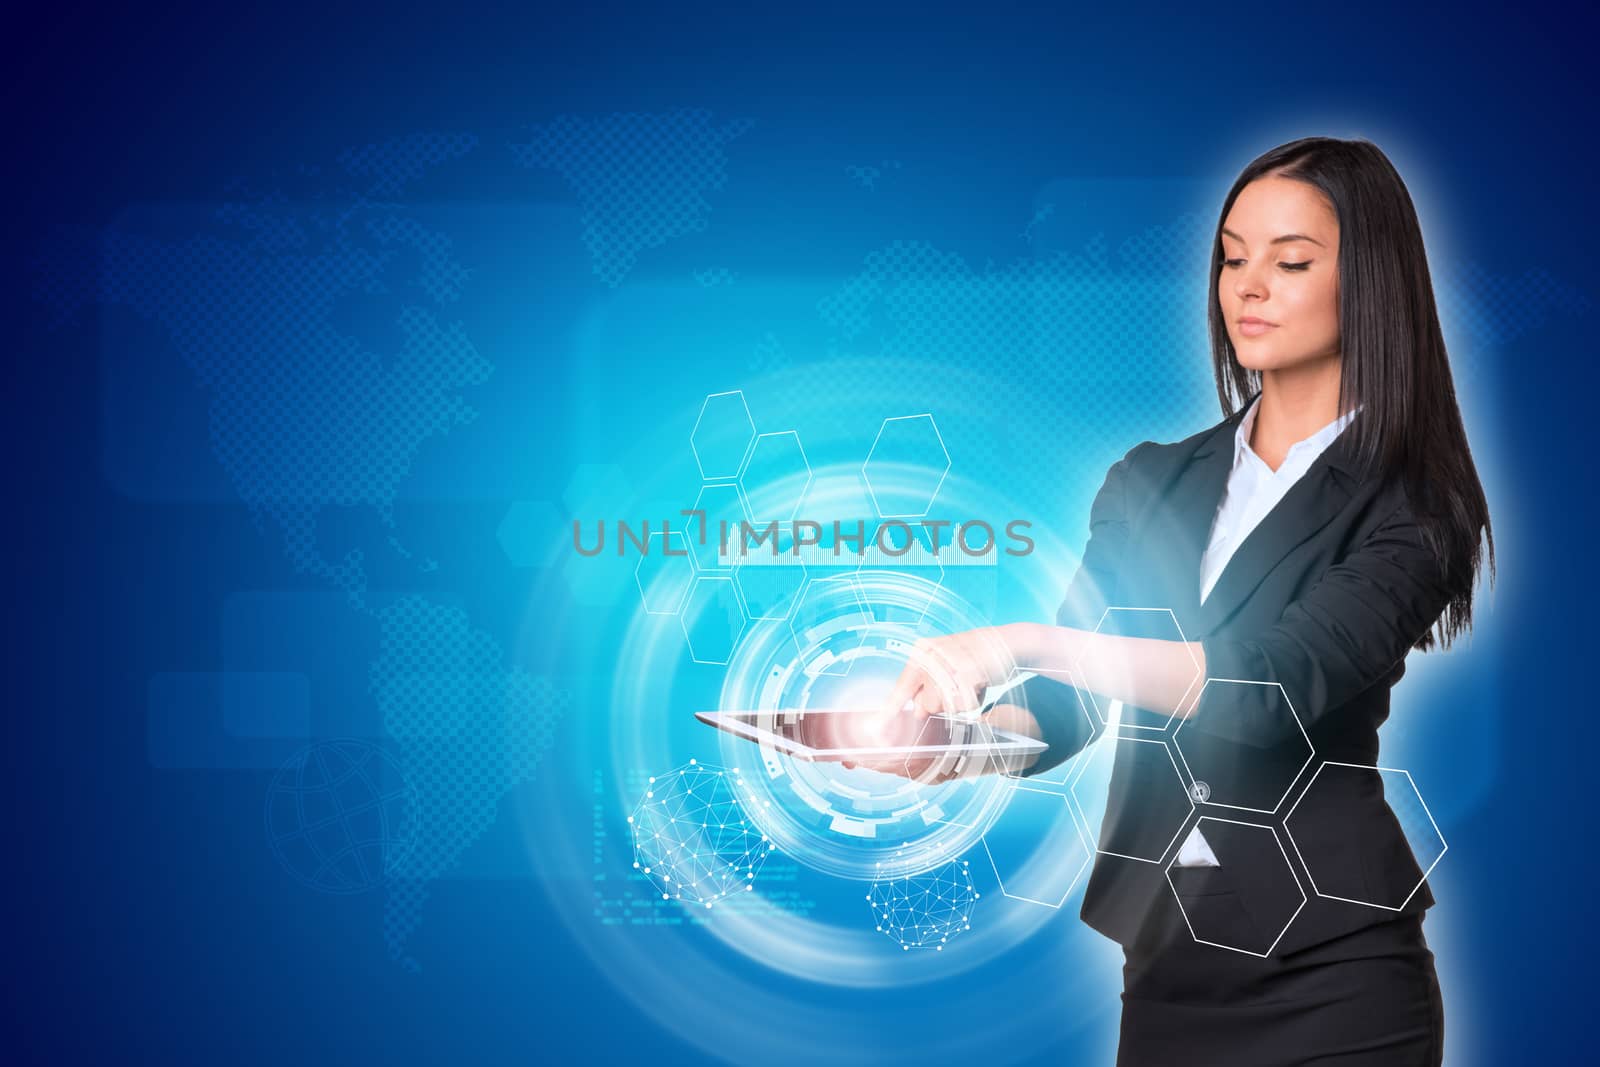 Beautiful businesswomen in suit using digital tablet. World map with circles and hexagons